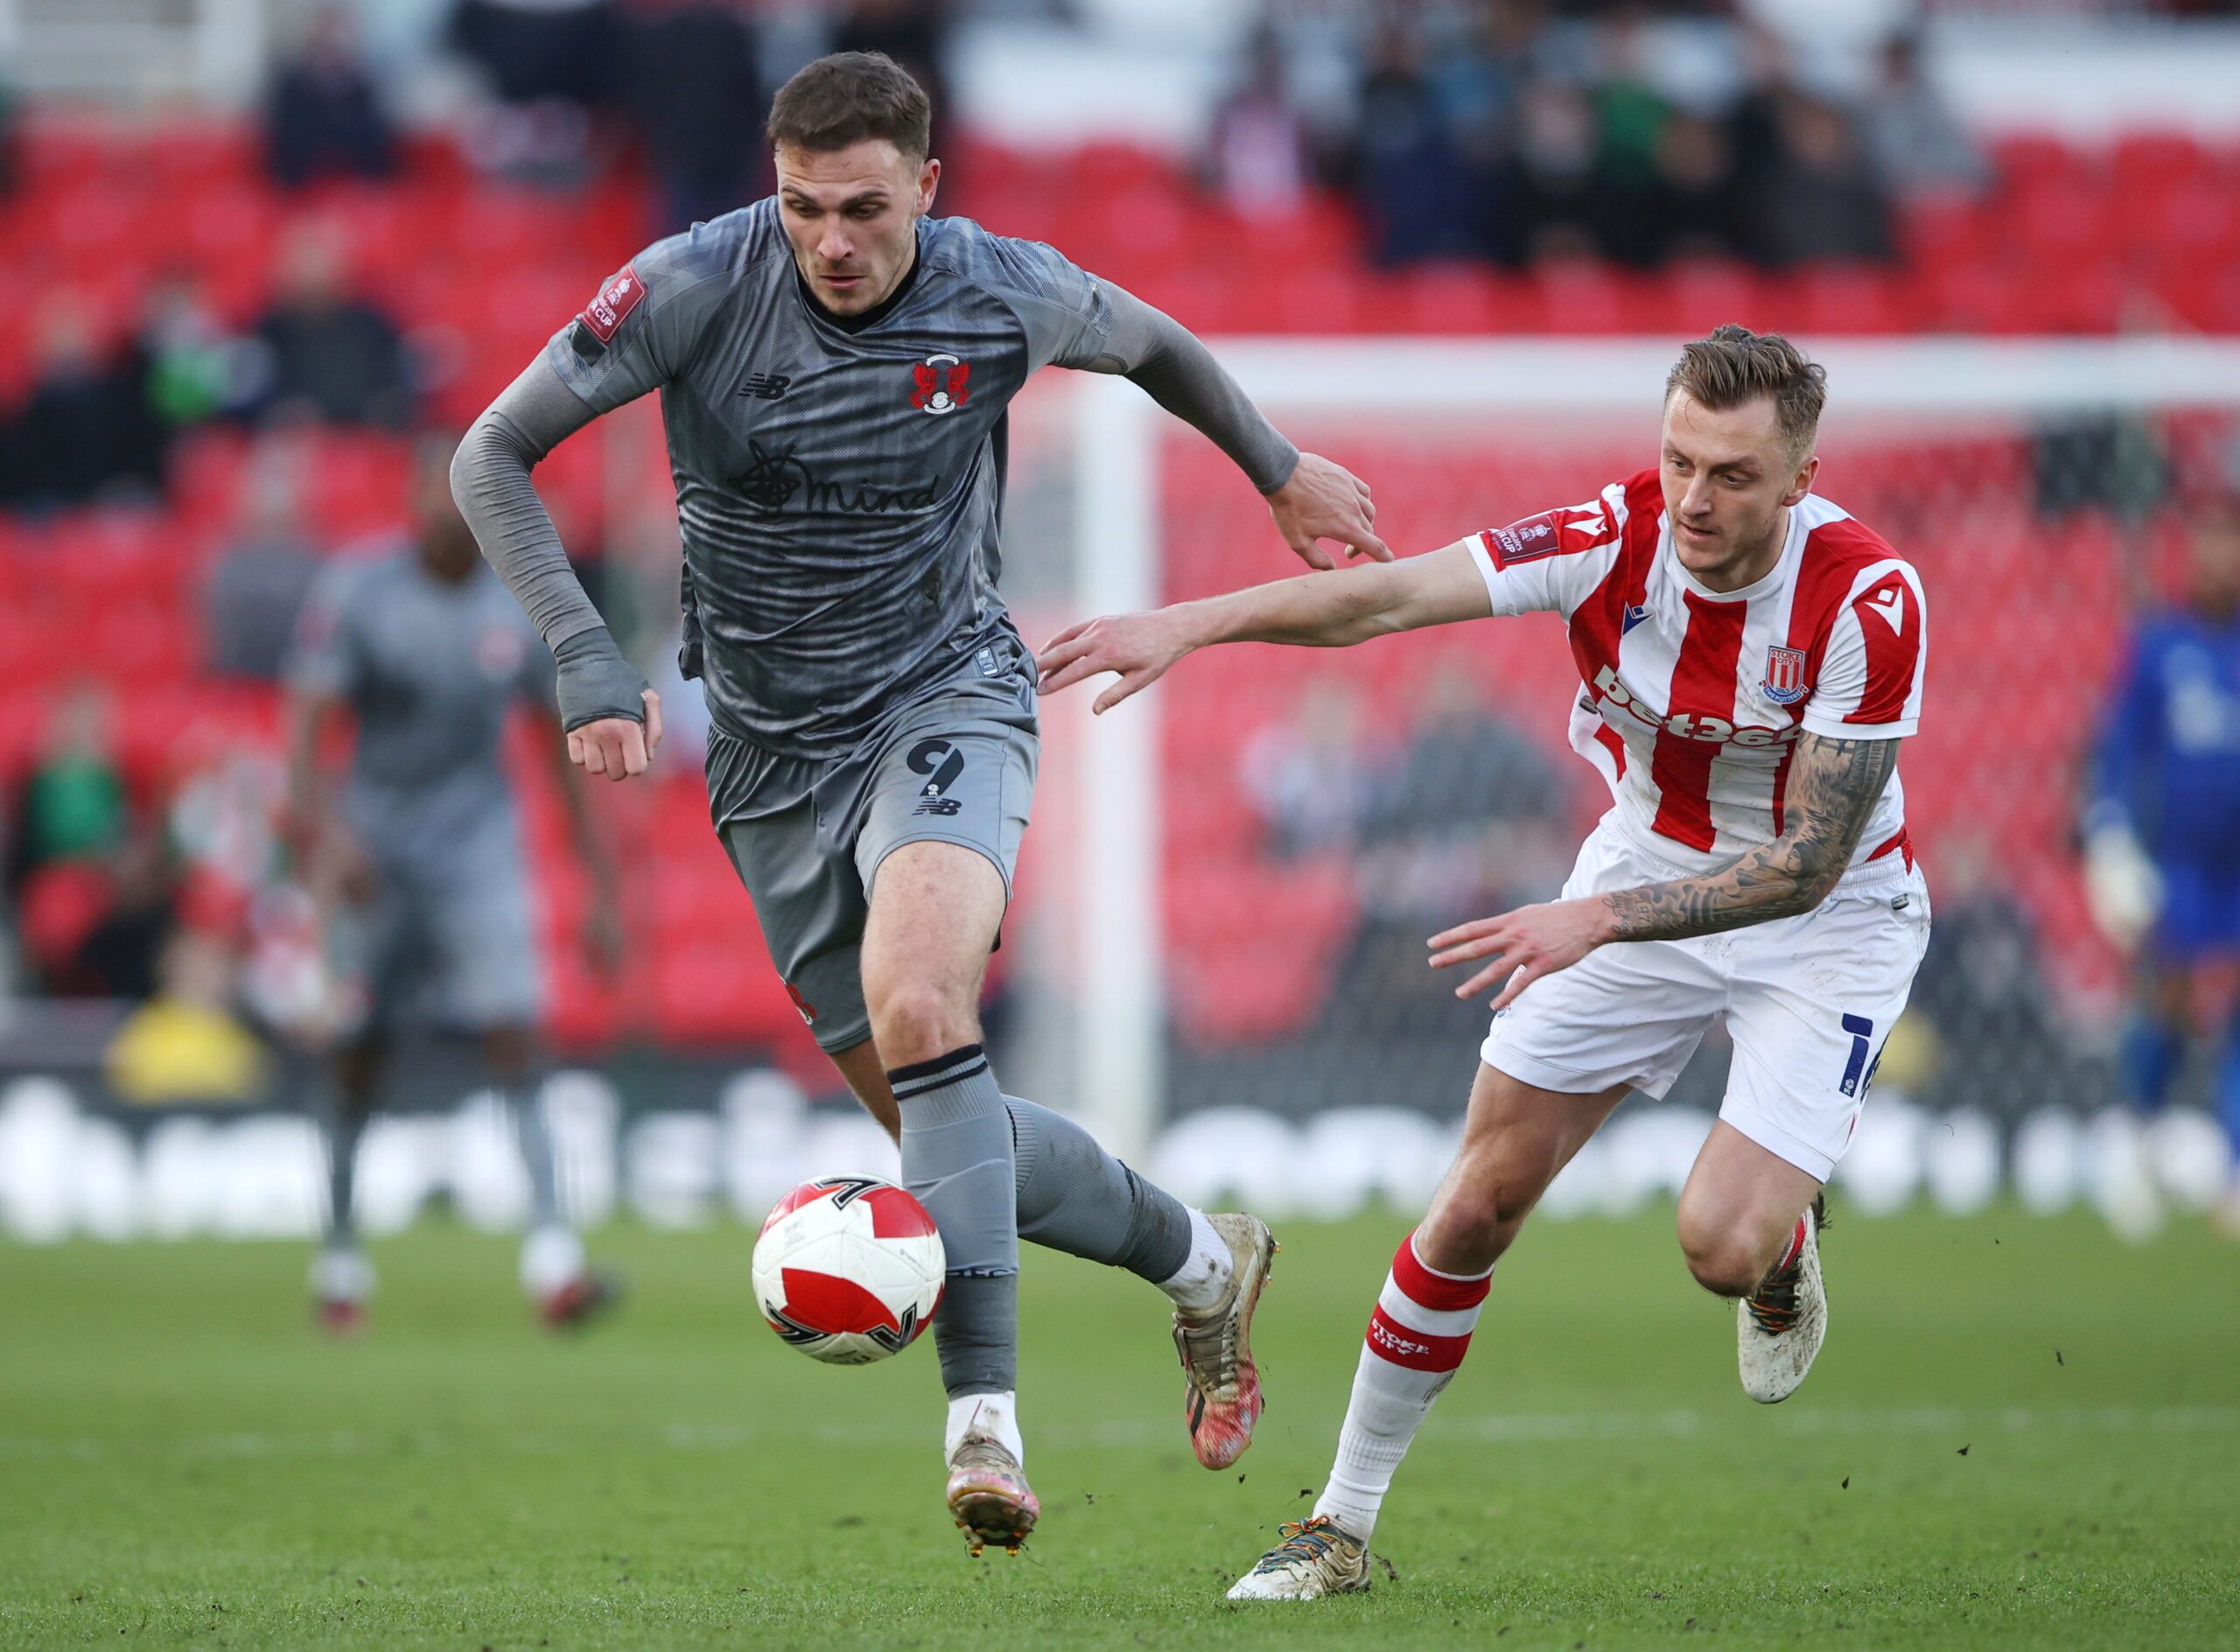 Soccer Football - FA Cup Third Round - Stoke City v Leyton Orient - bet365 Stadium, Stoke-on-Trent, Britain - January 9, 2022 Leyton Orient's Harry Smith in action with Stoke City's Ben Wilmot Action Images via Reuters/Molly Darlington